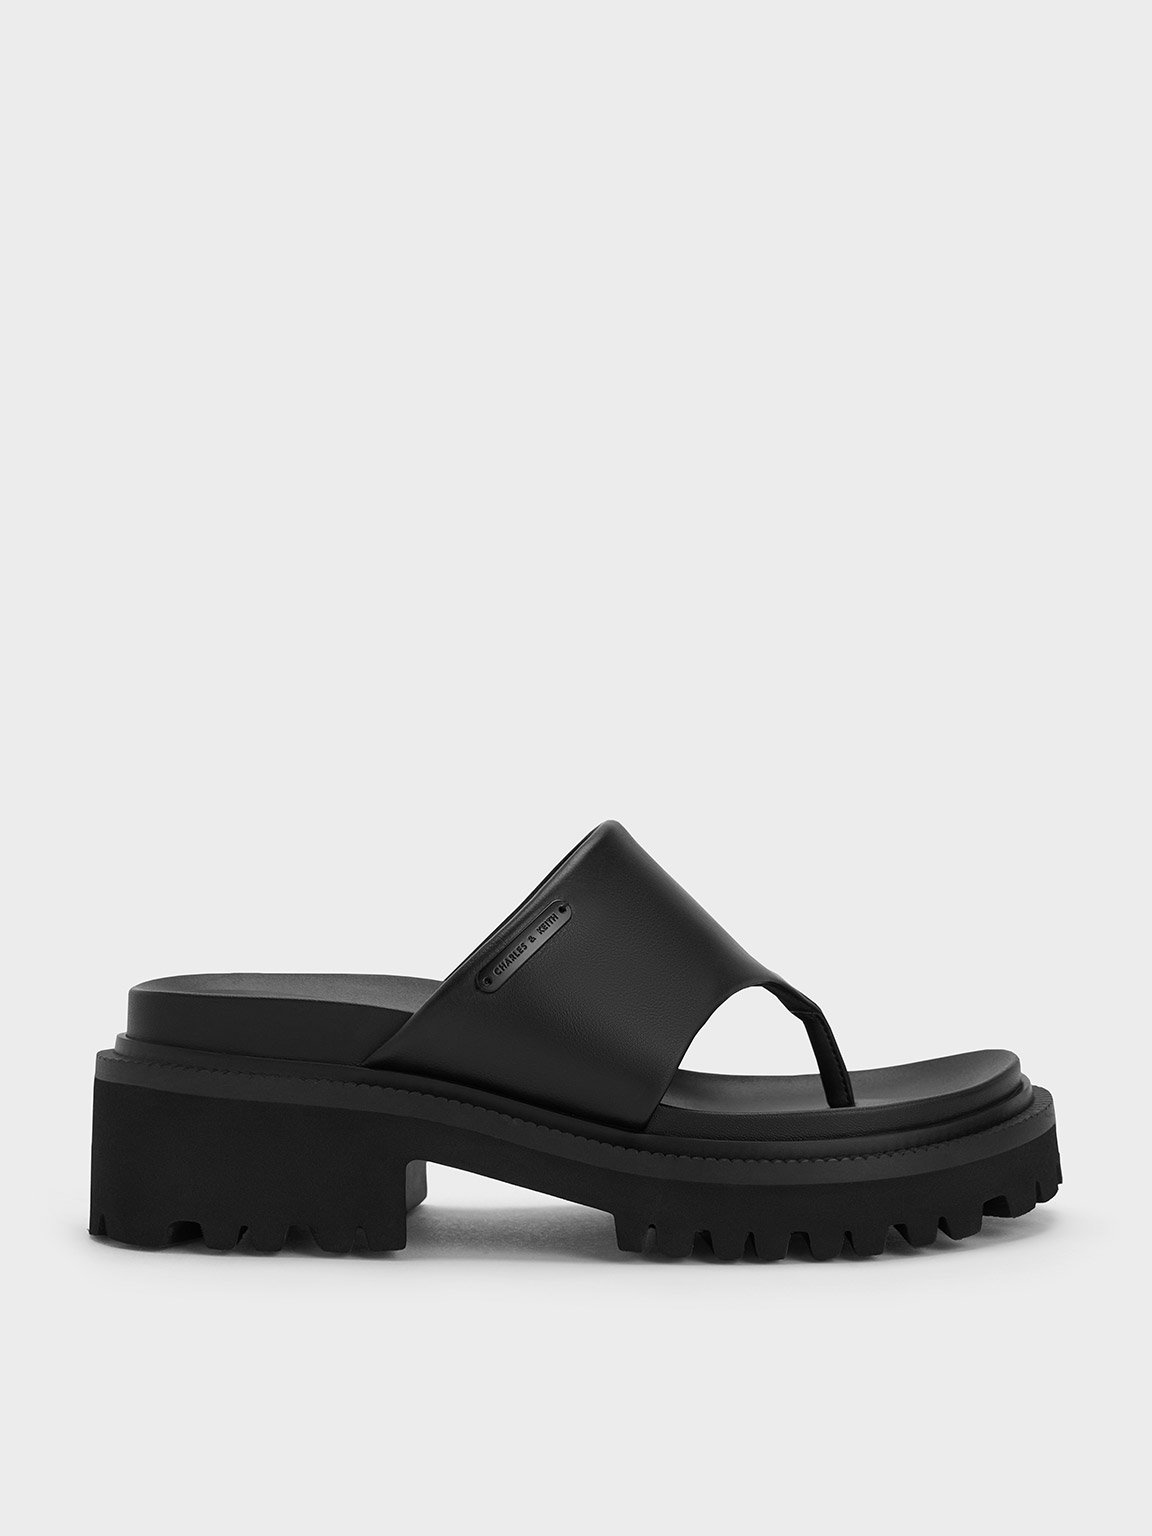 Black Padded Ridged-Sole Thong Sandals - CHARLES & KEITH SG